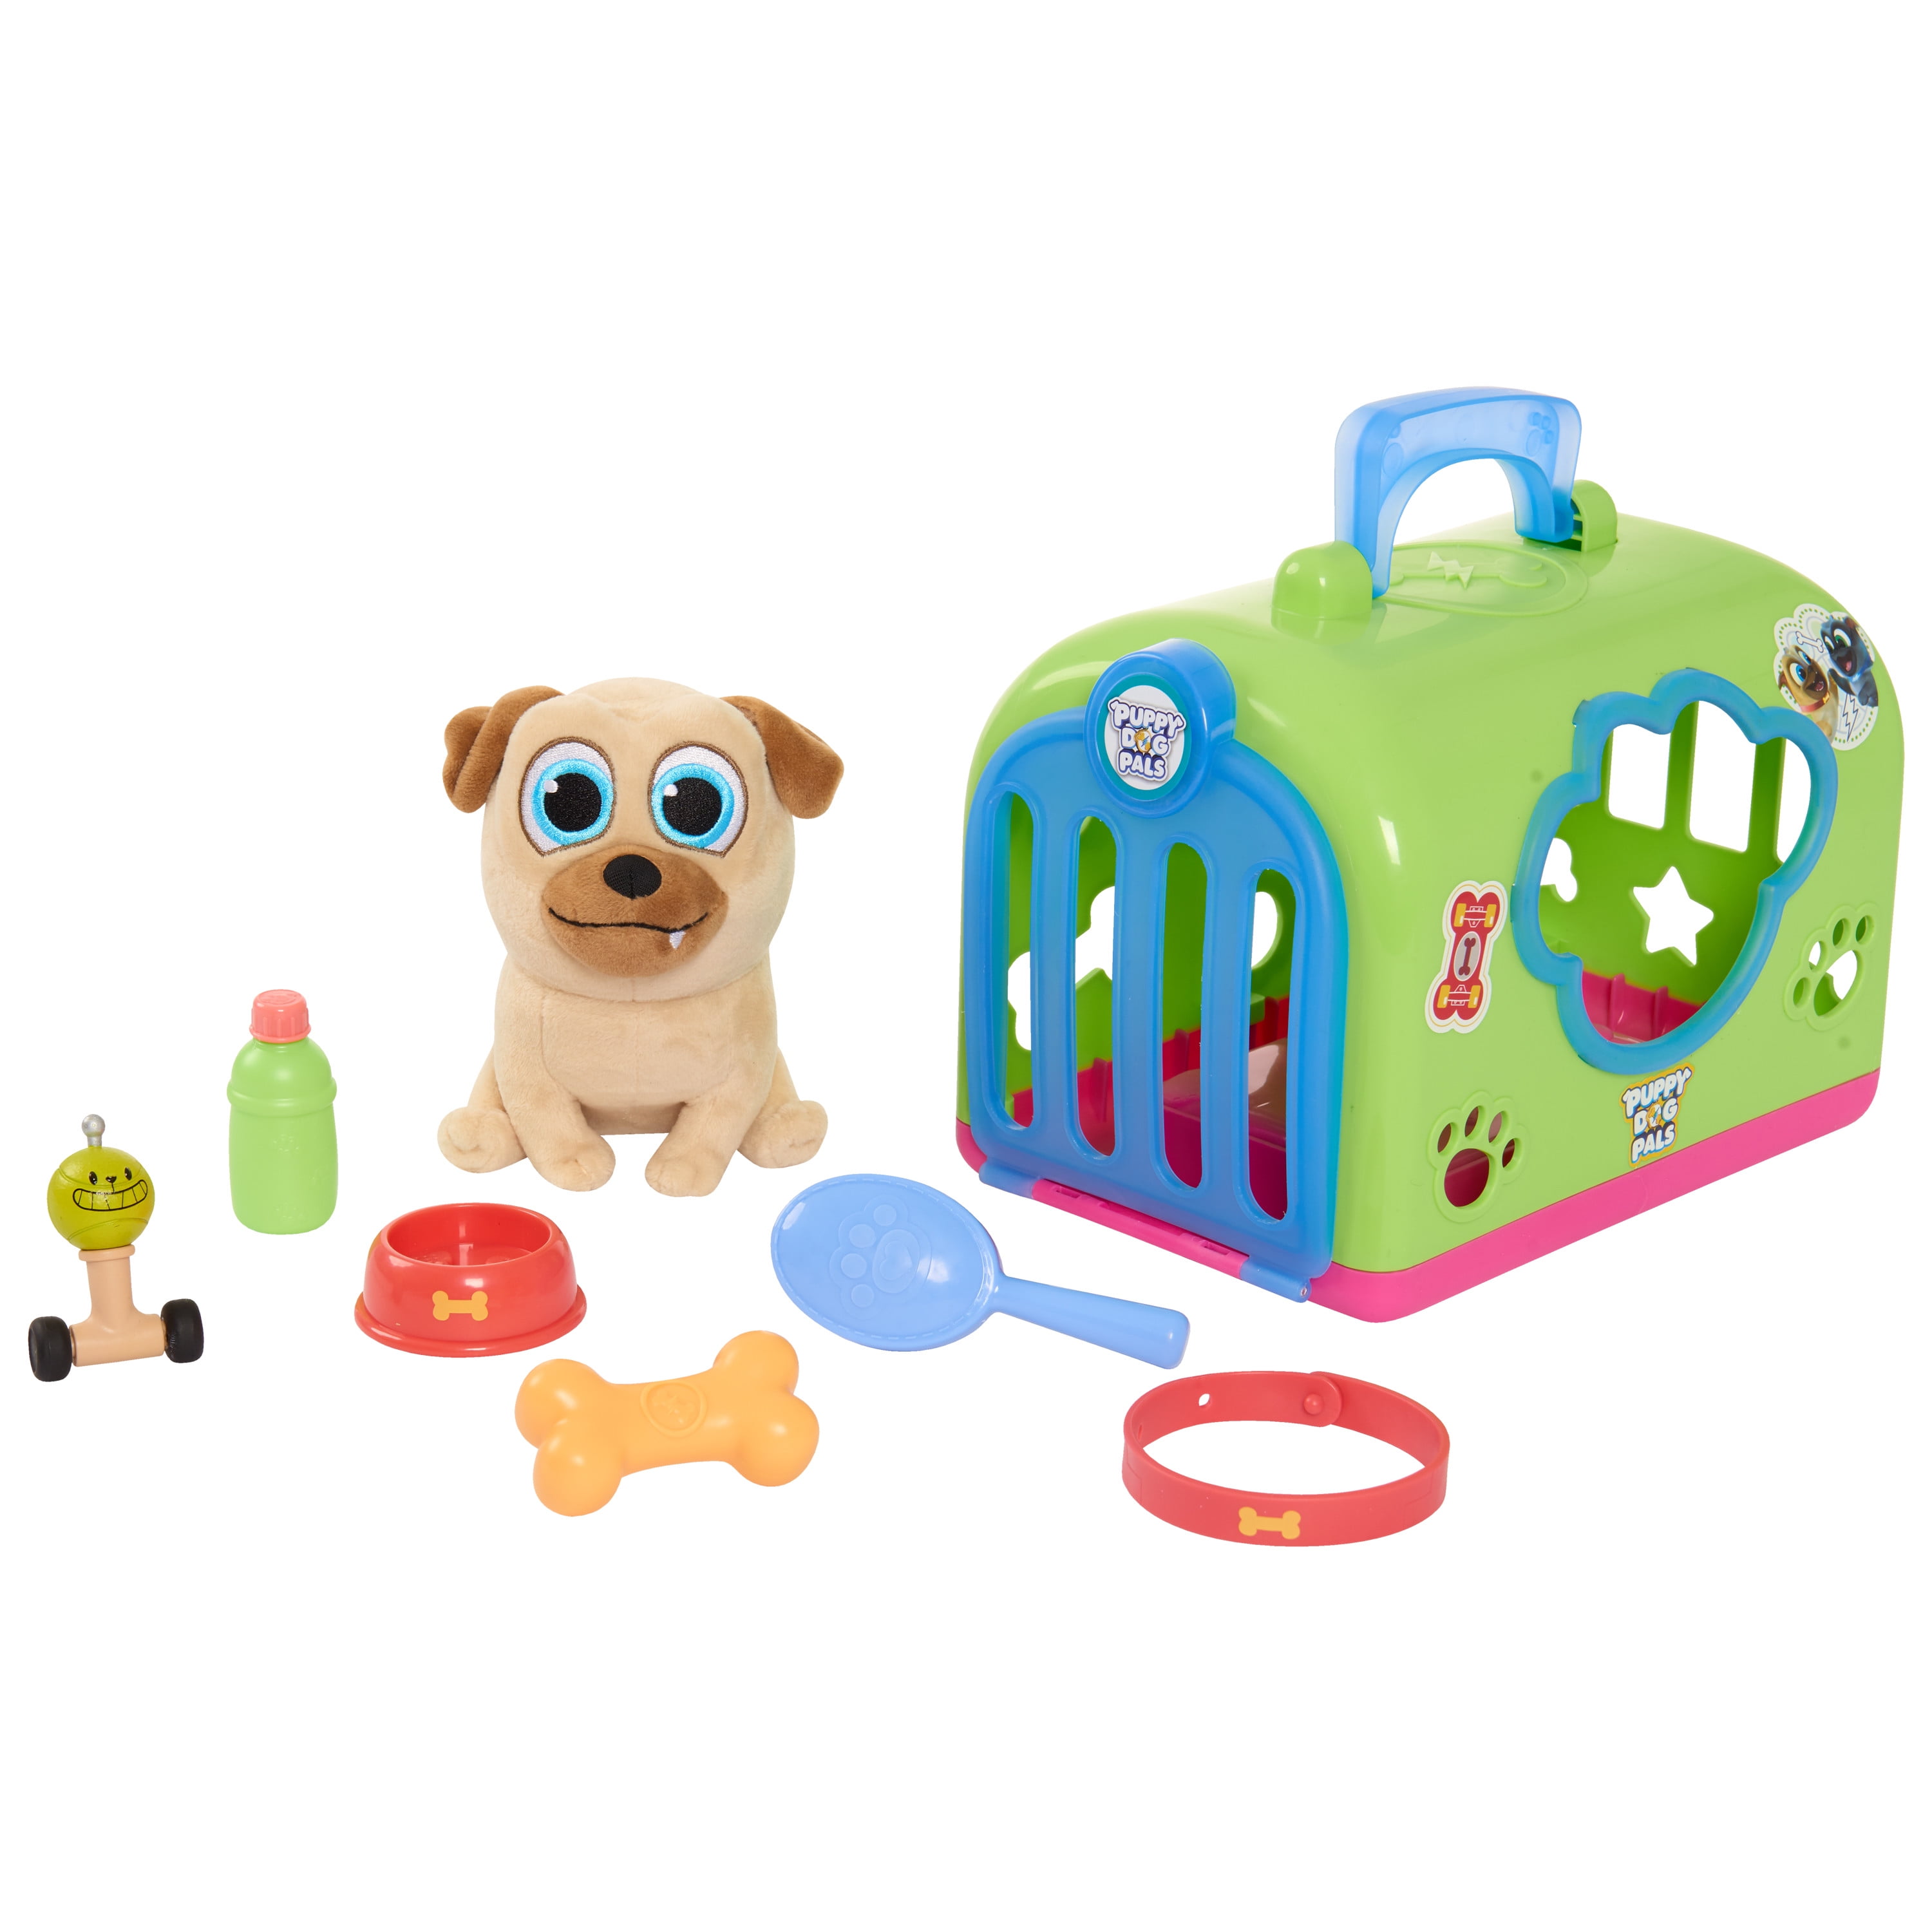 Puppy Dog Shaped Kids Plastic Puzzle With Bright Colors Fun Skill Activity